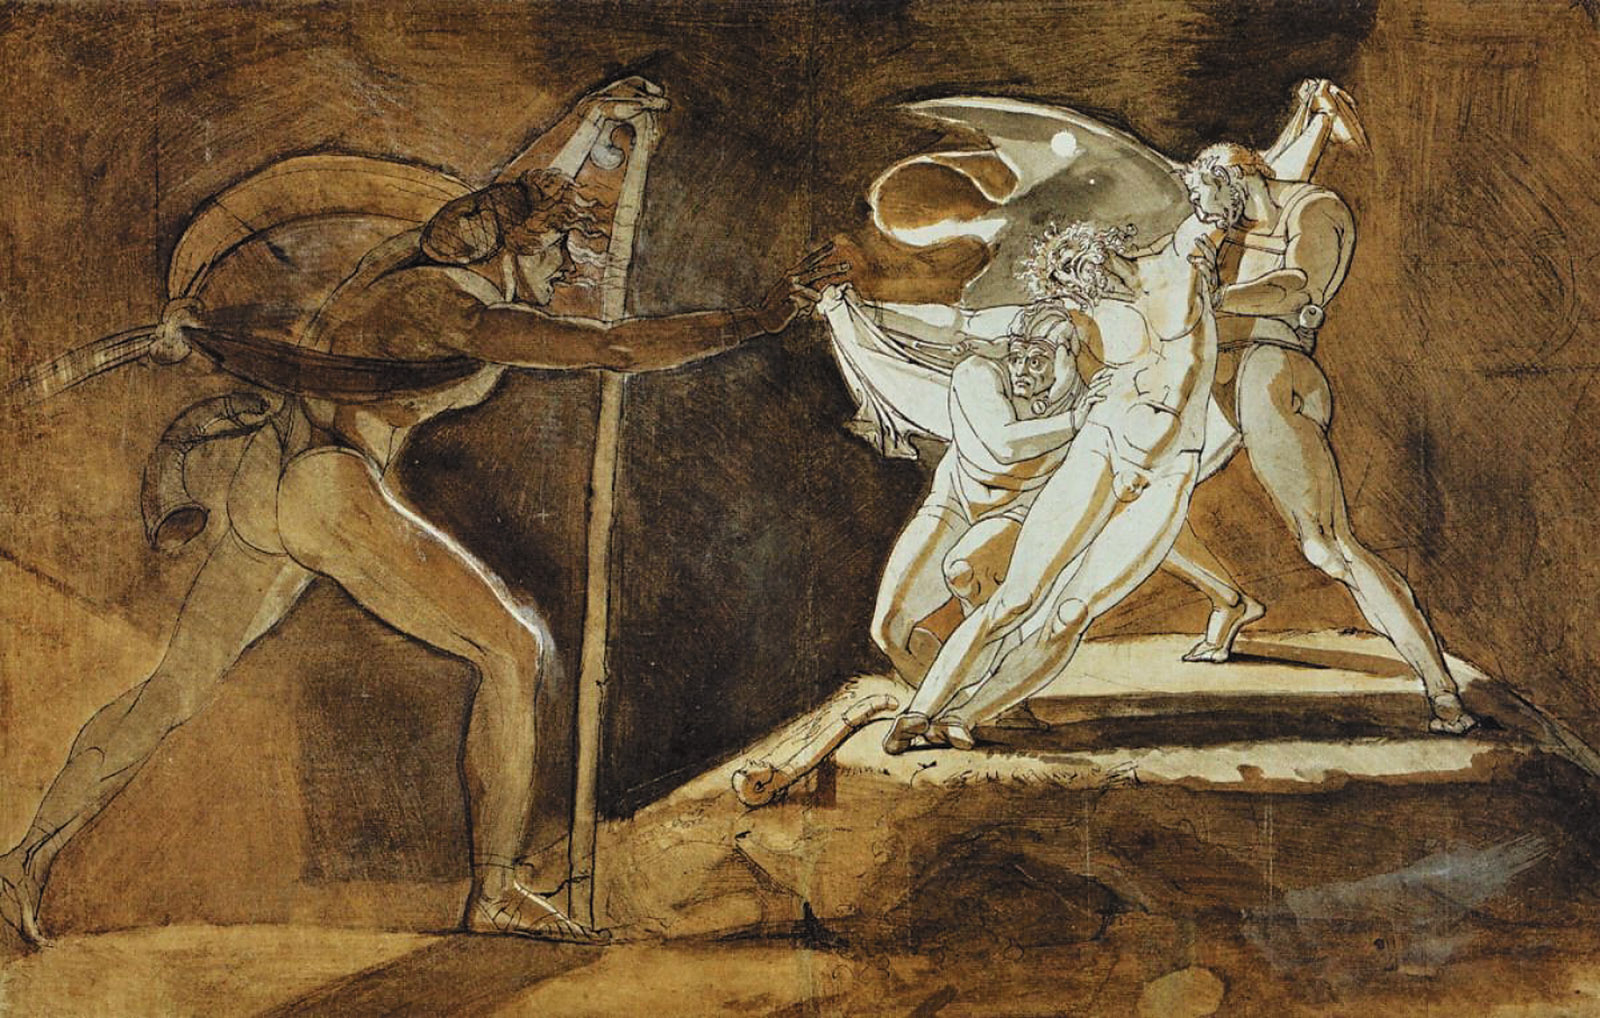 ‘Edgar, Feigning Madness, Approaches Lear’; drawing by Henry Fuseli, 1772